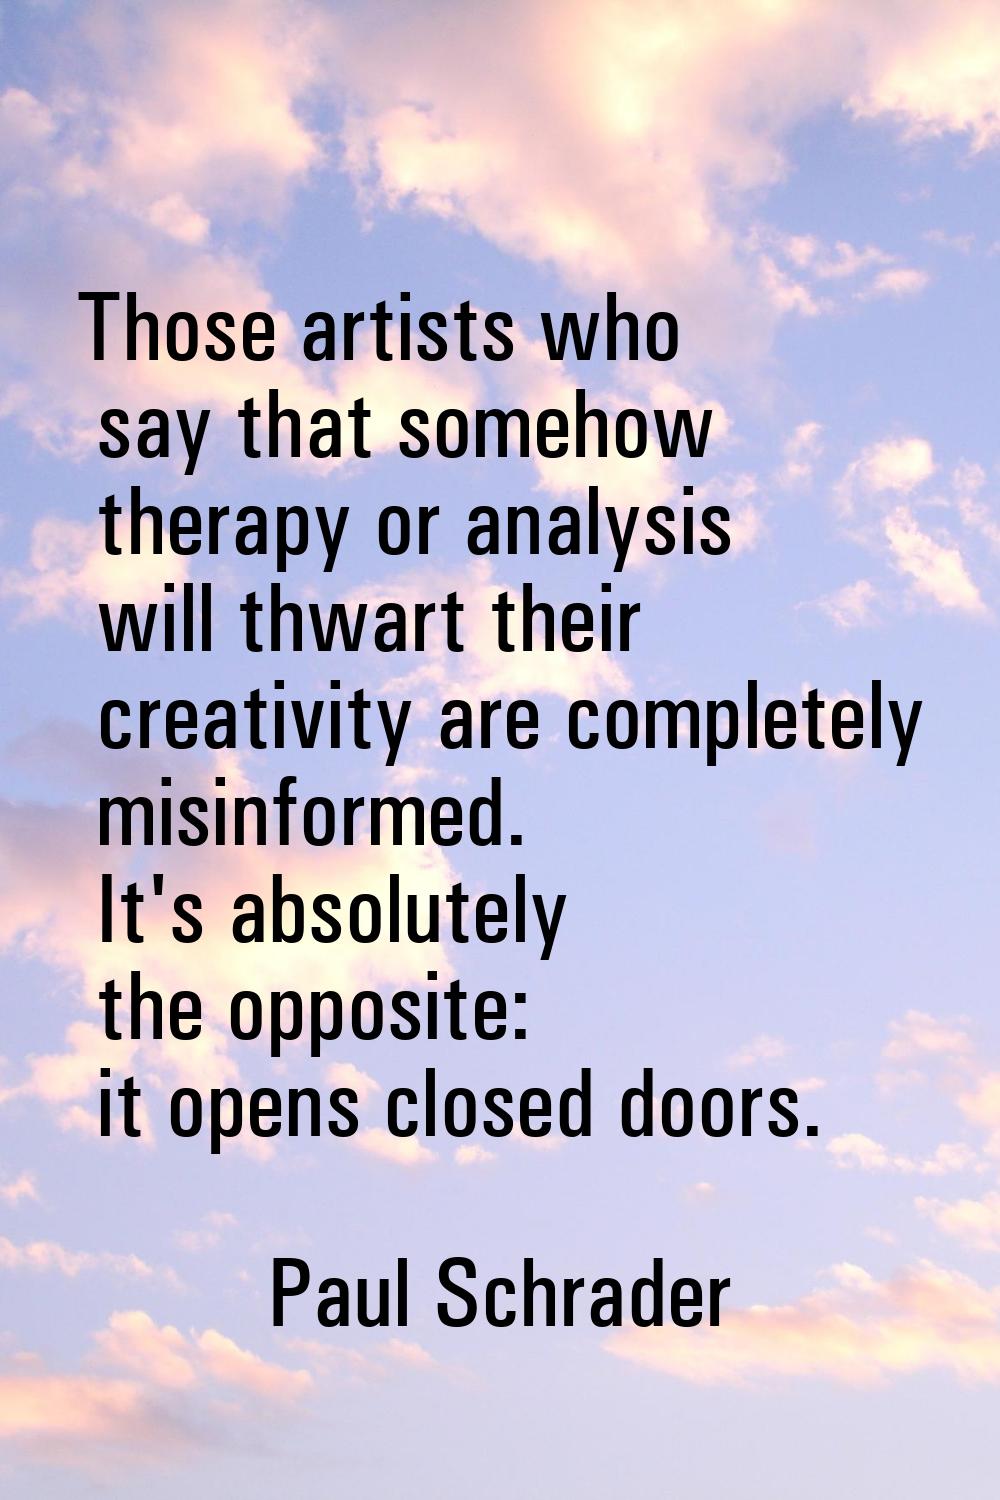 Those artists who say that somehow therapy or analysis will thwart their creativity are completely 